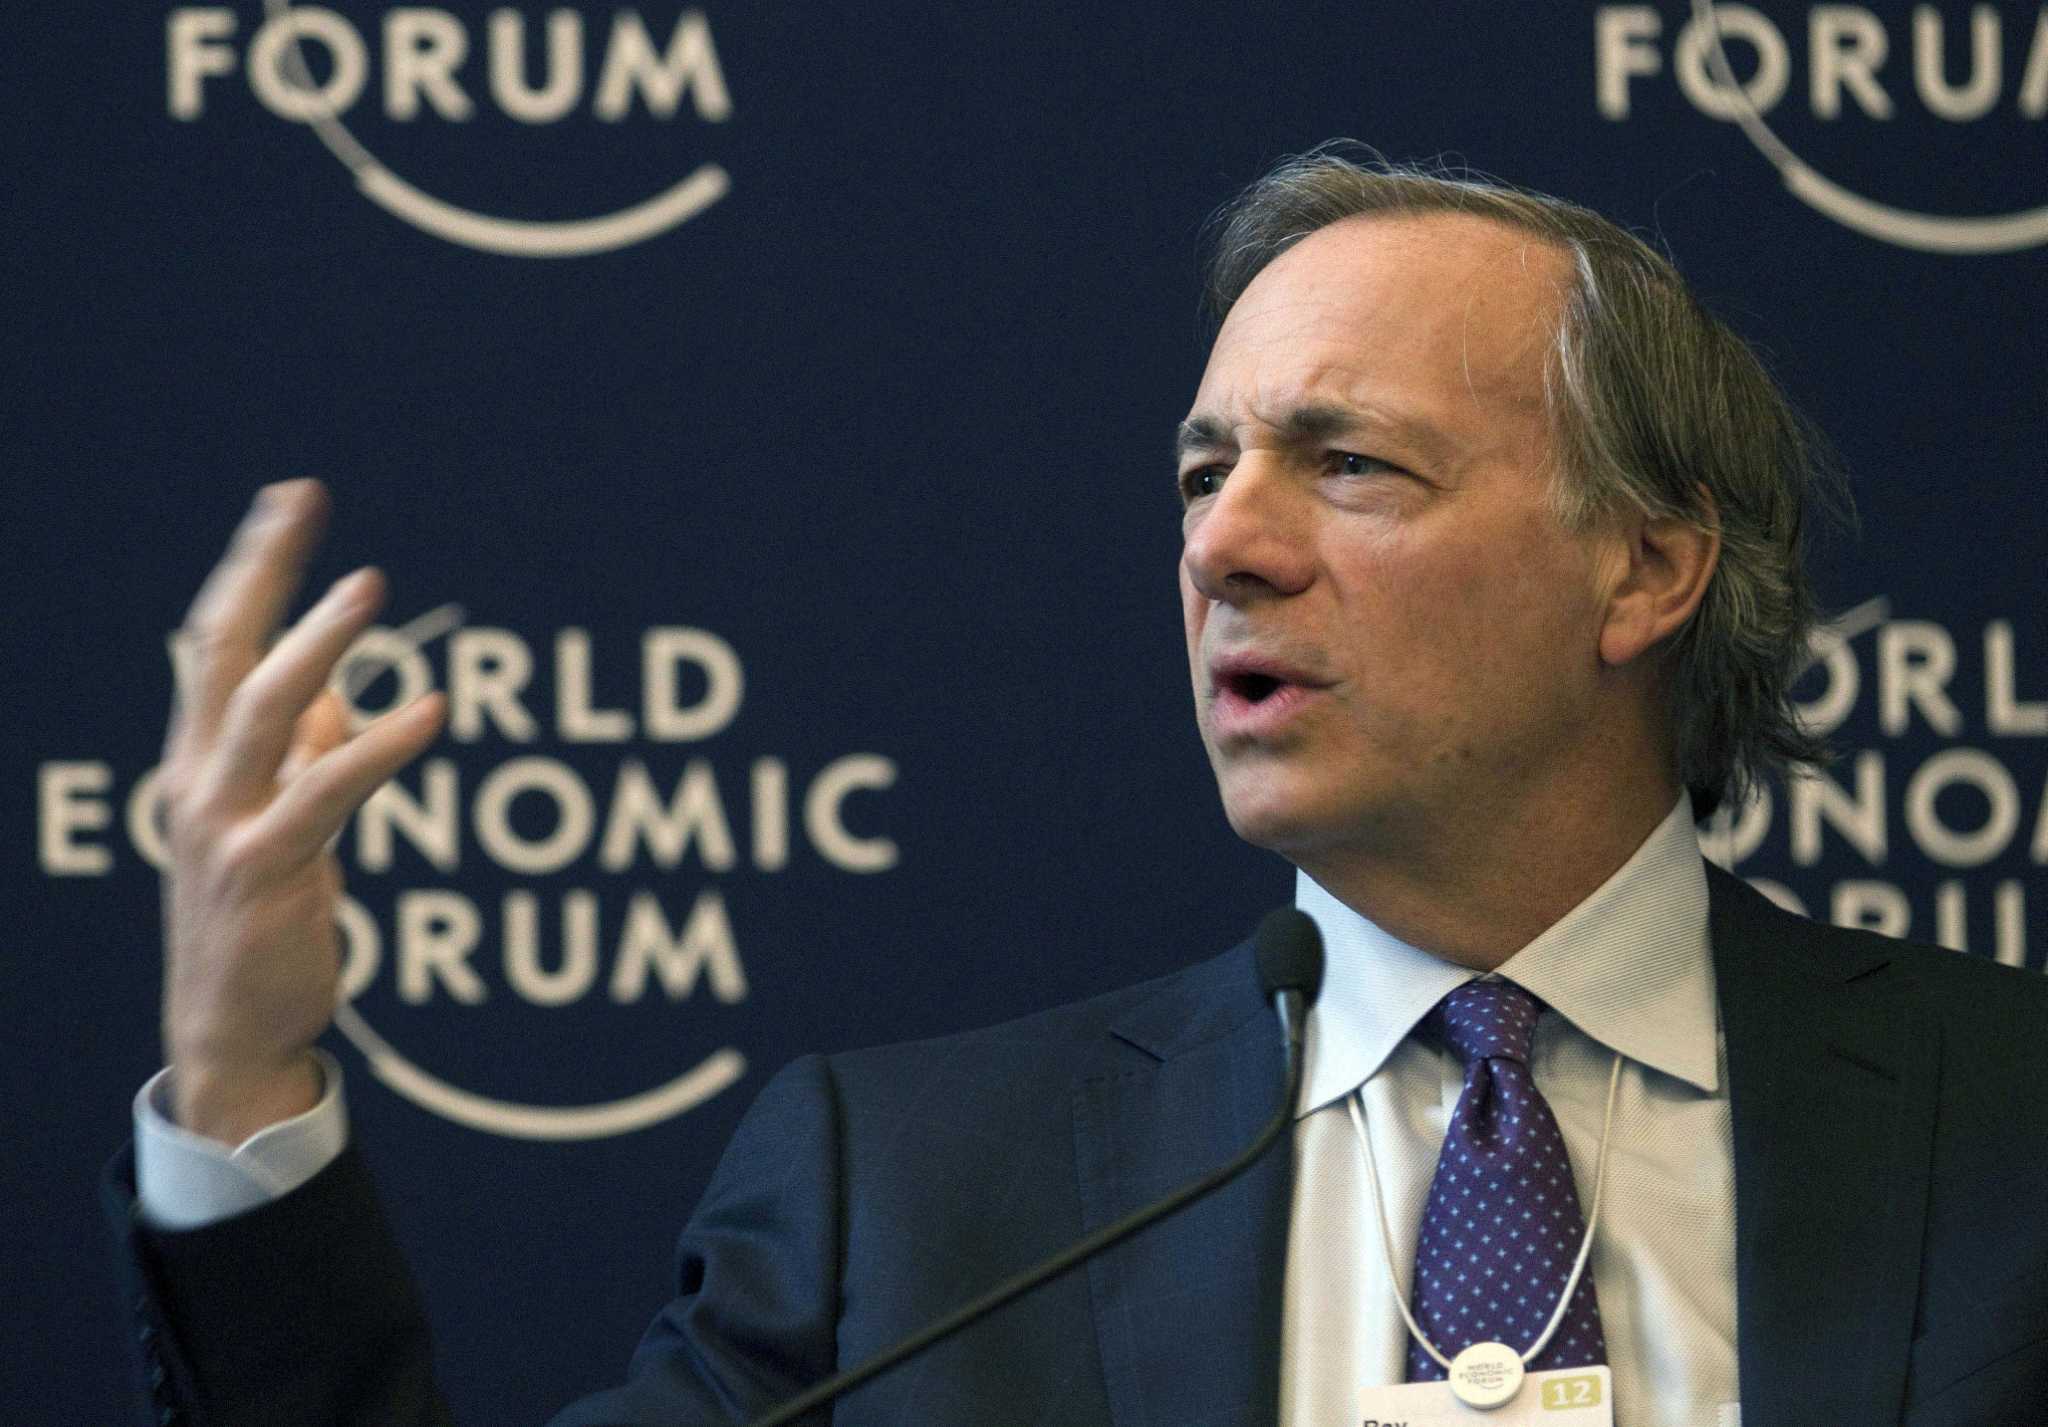 Dalio dishes on middle class at Davos